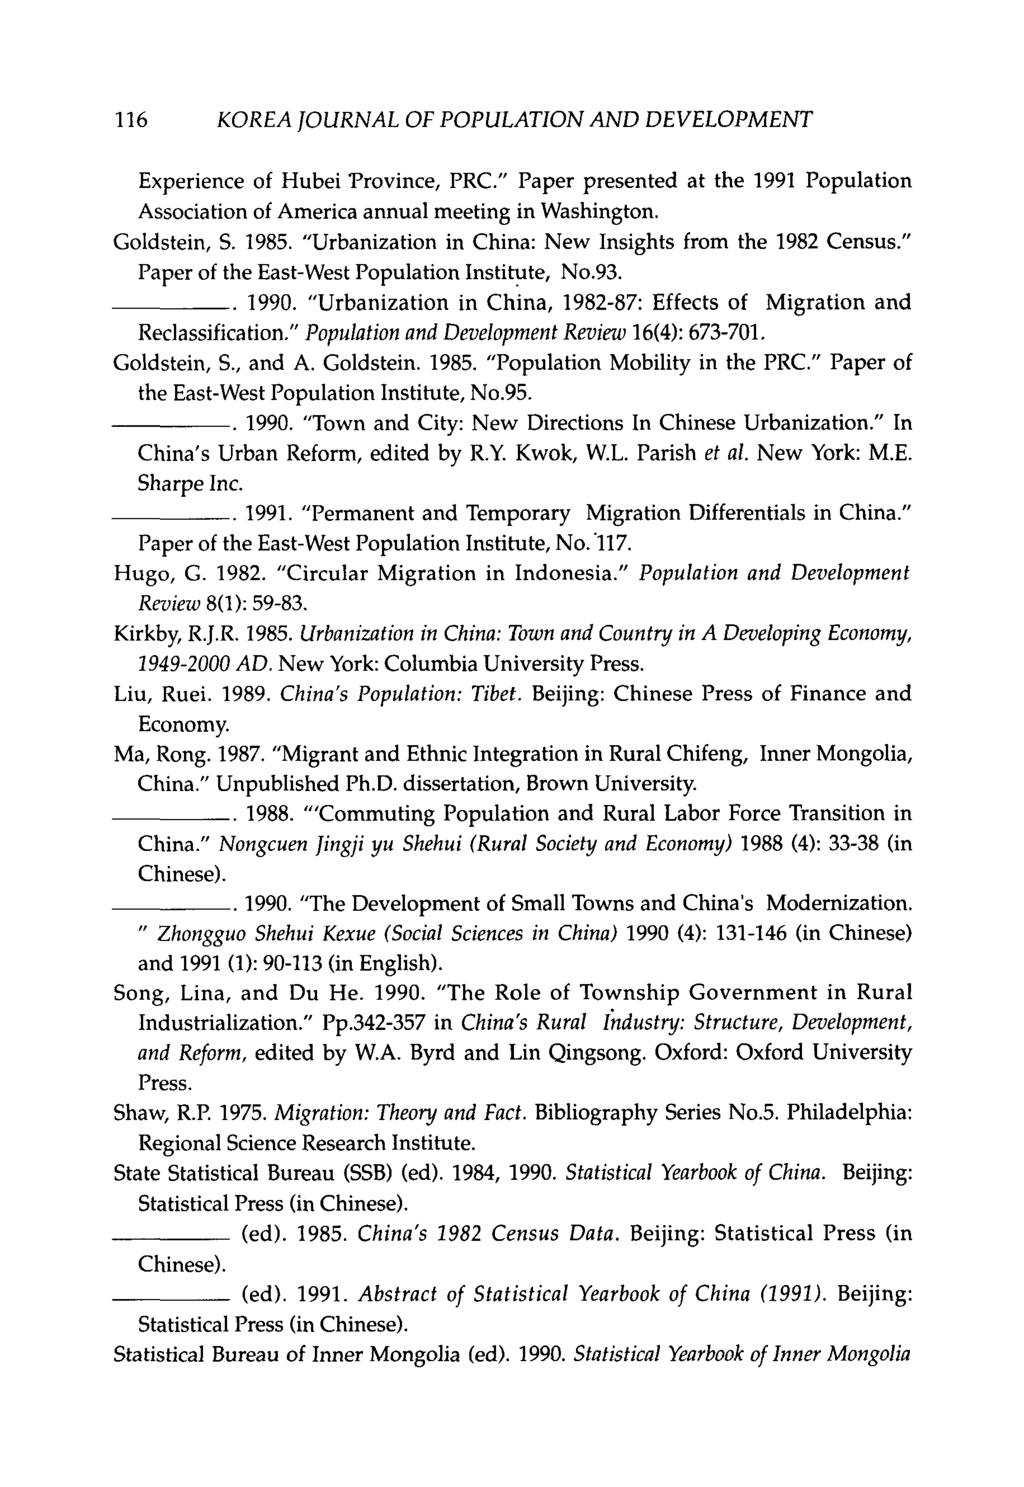 116 KOREA JOURNAL OF POPULATION AND DEVELOPMENT Experience of Hubei Province, PRC." Paper presented at the 1991 Population Association of America annual meeting in Washington. Goldstein, S. 1985.